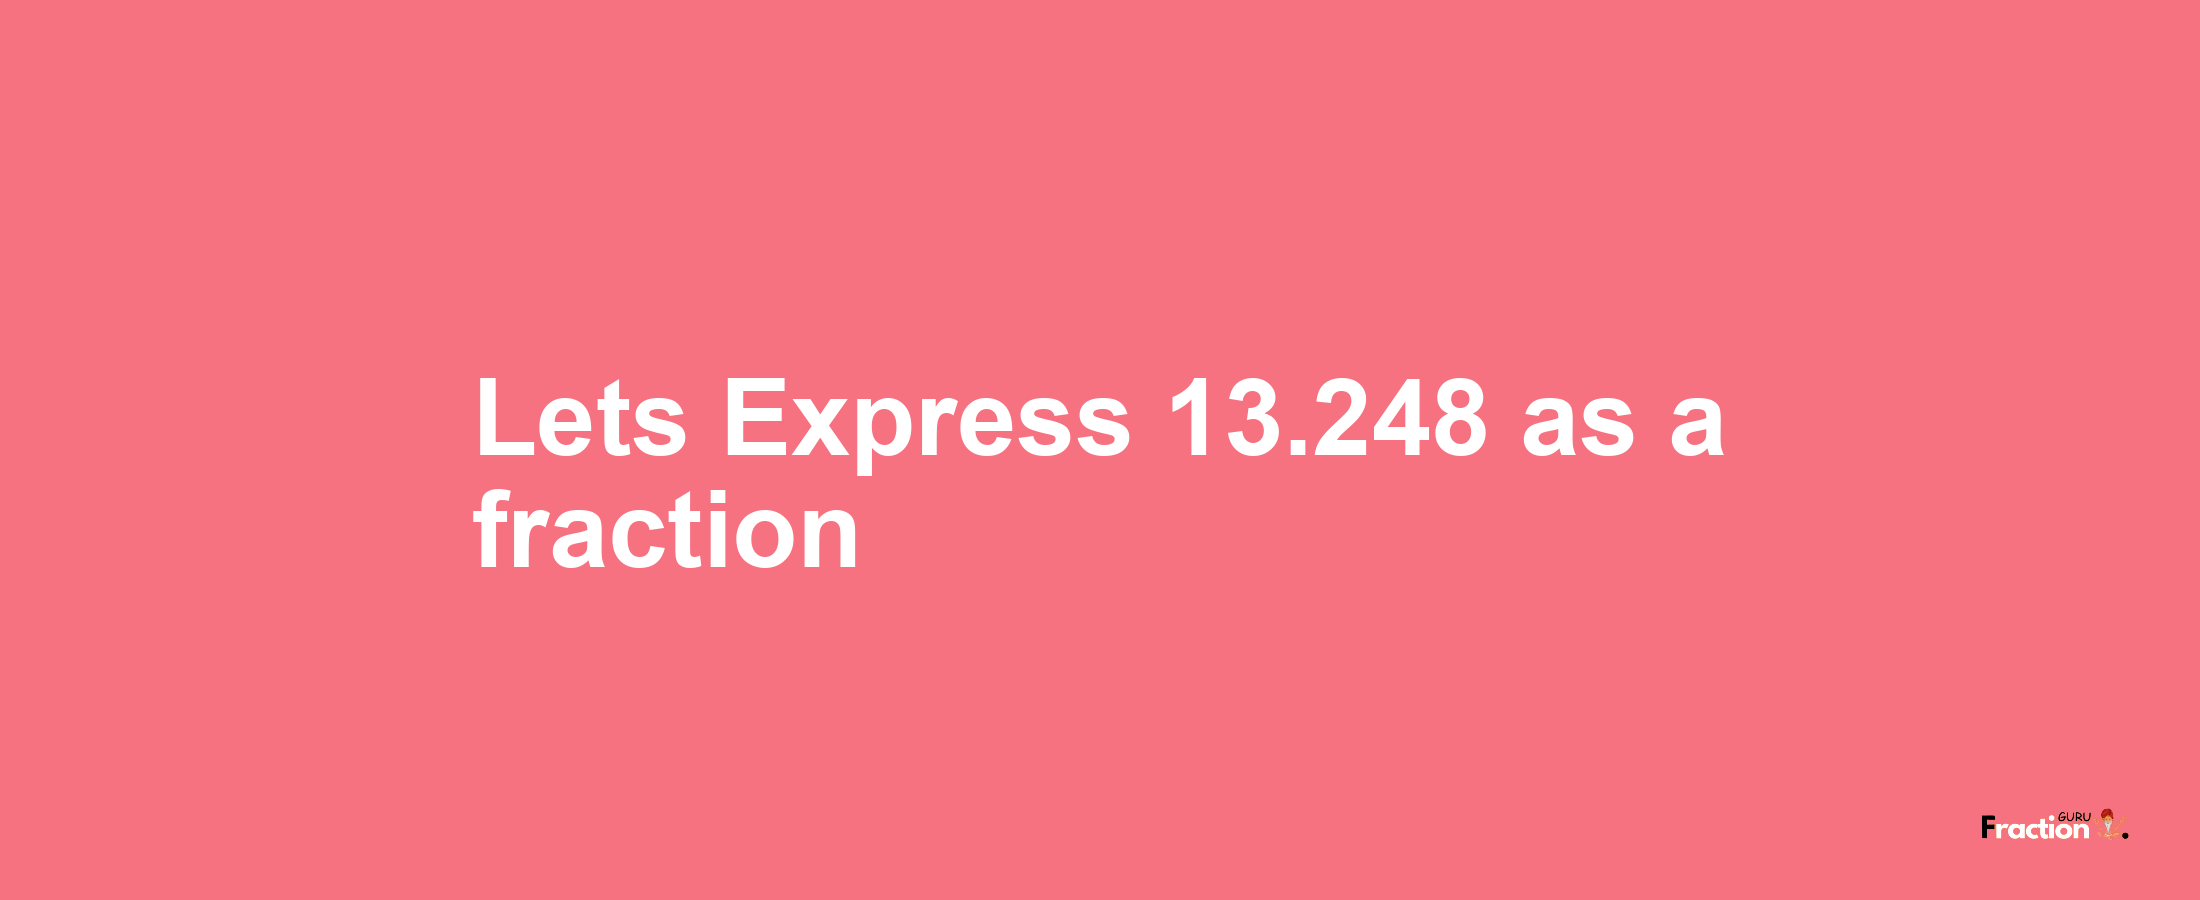 Lets Express 13.248 as afraction